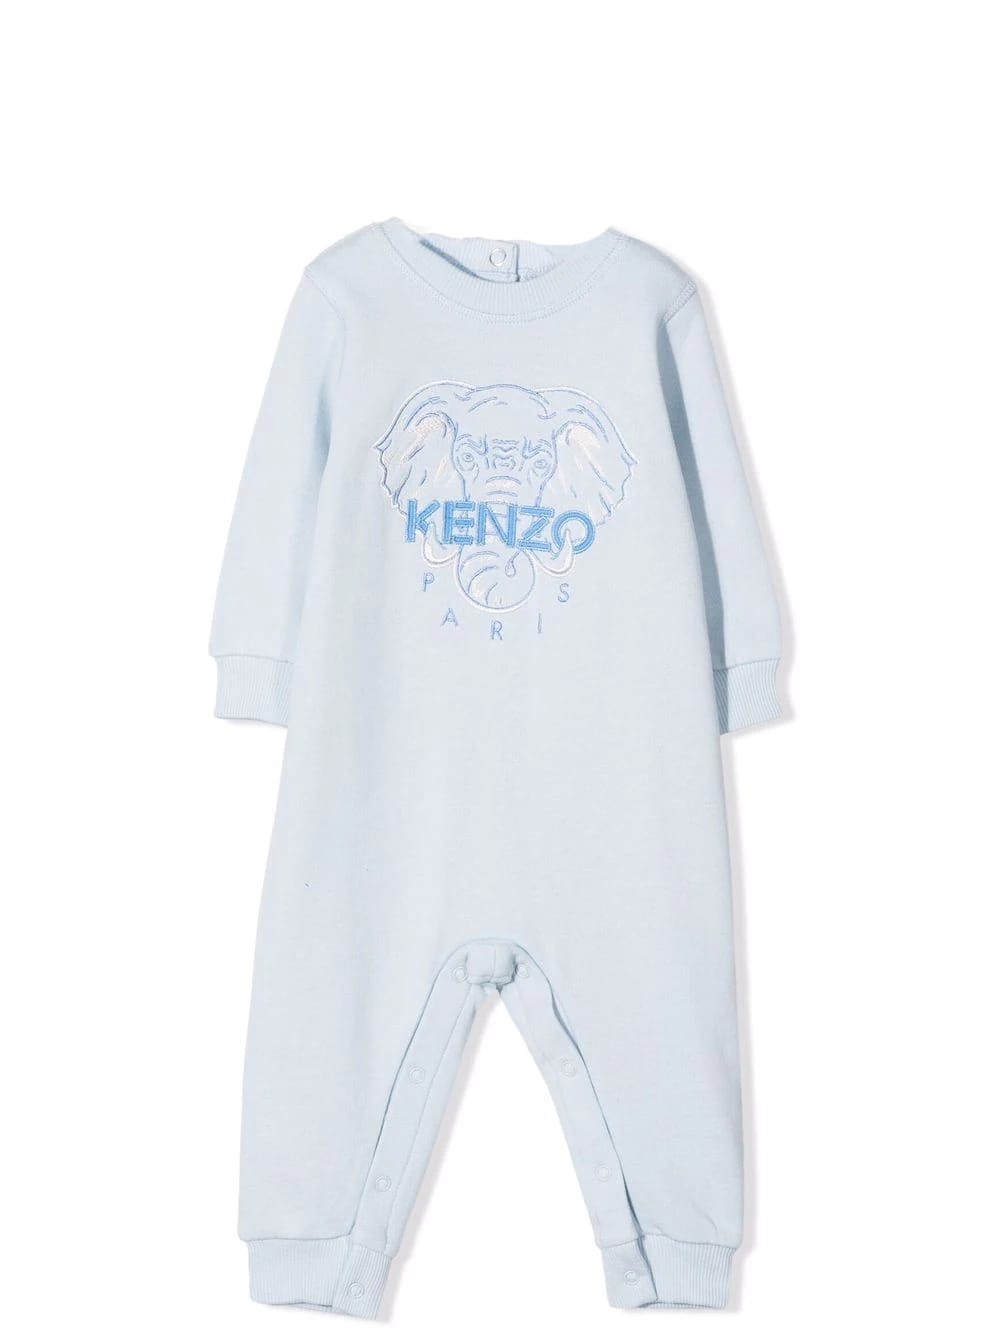 Kenzo Kids Jumpsuit With Print